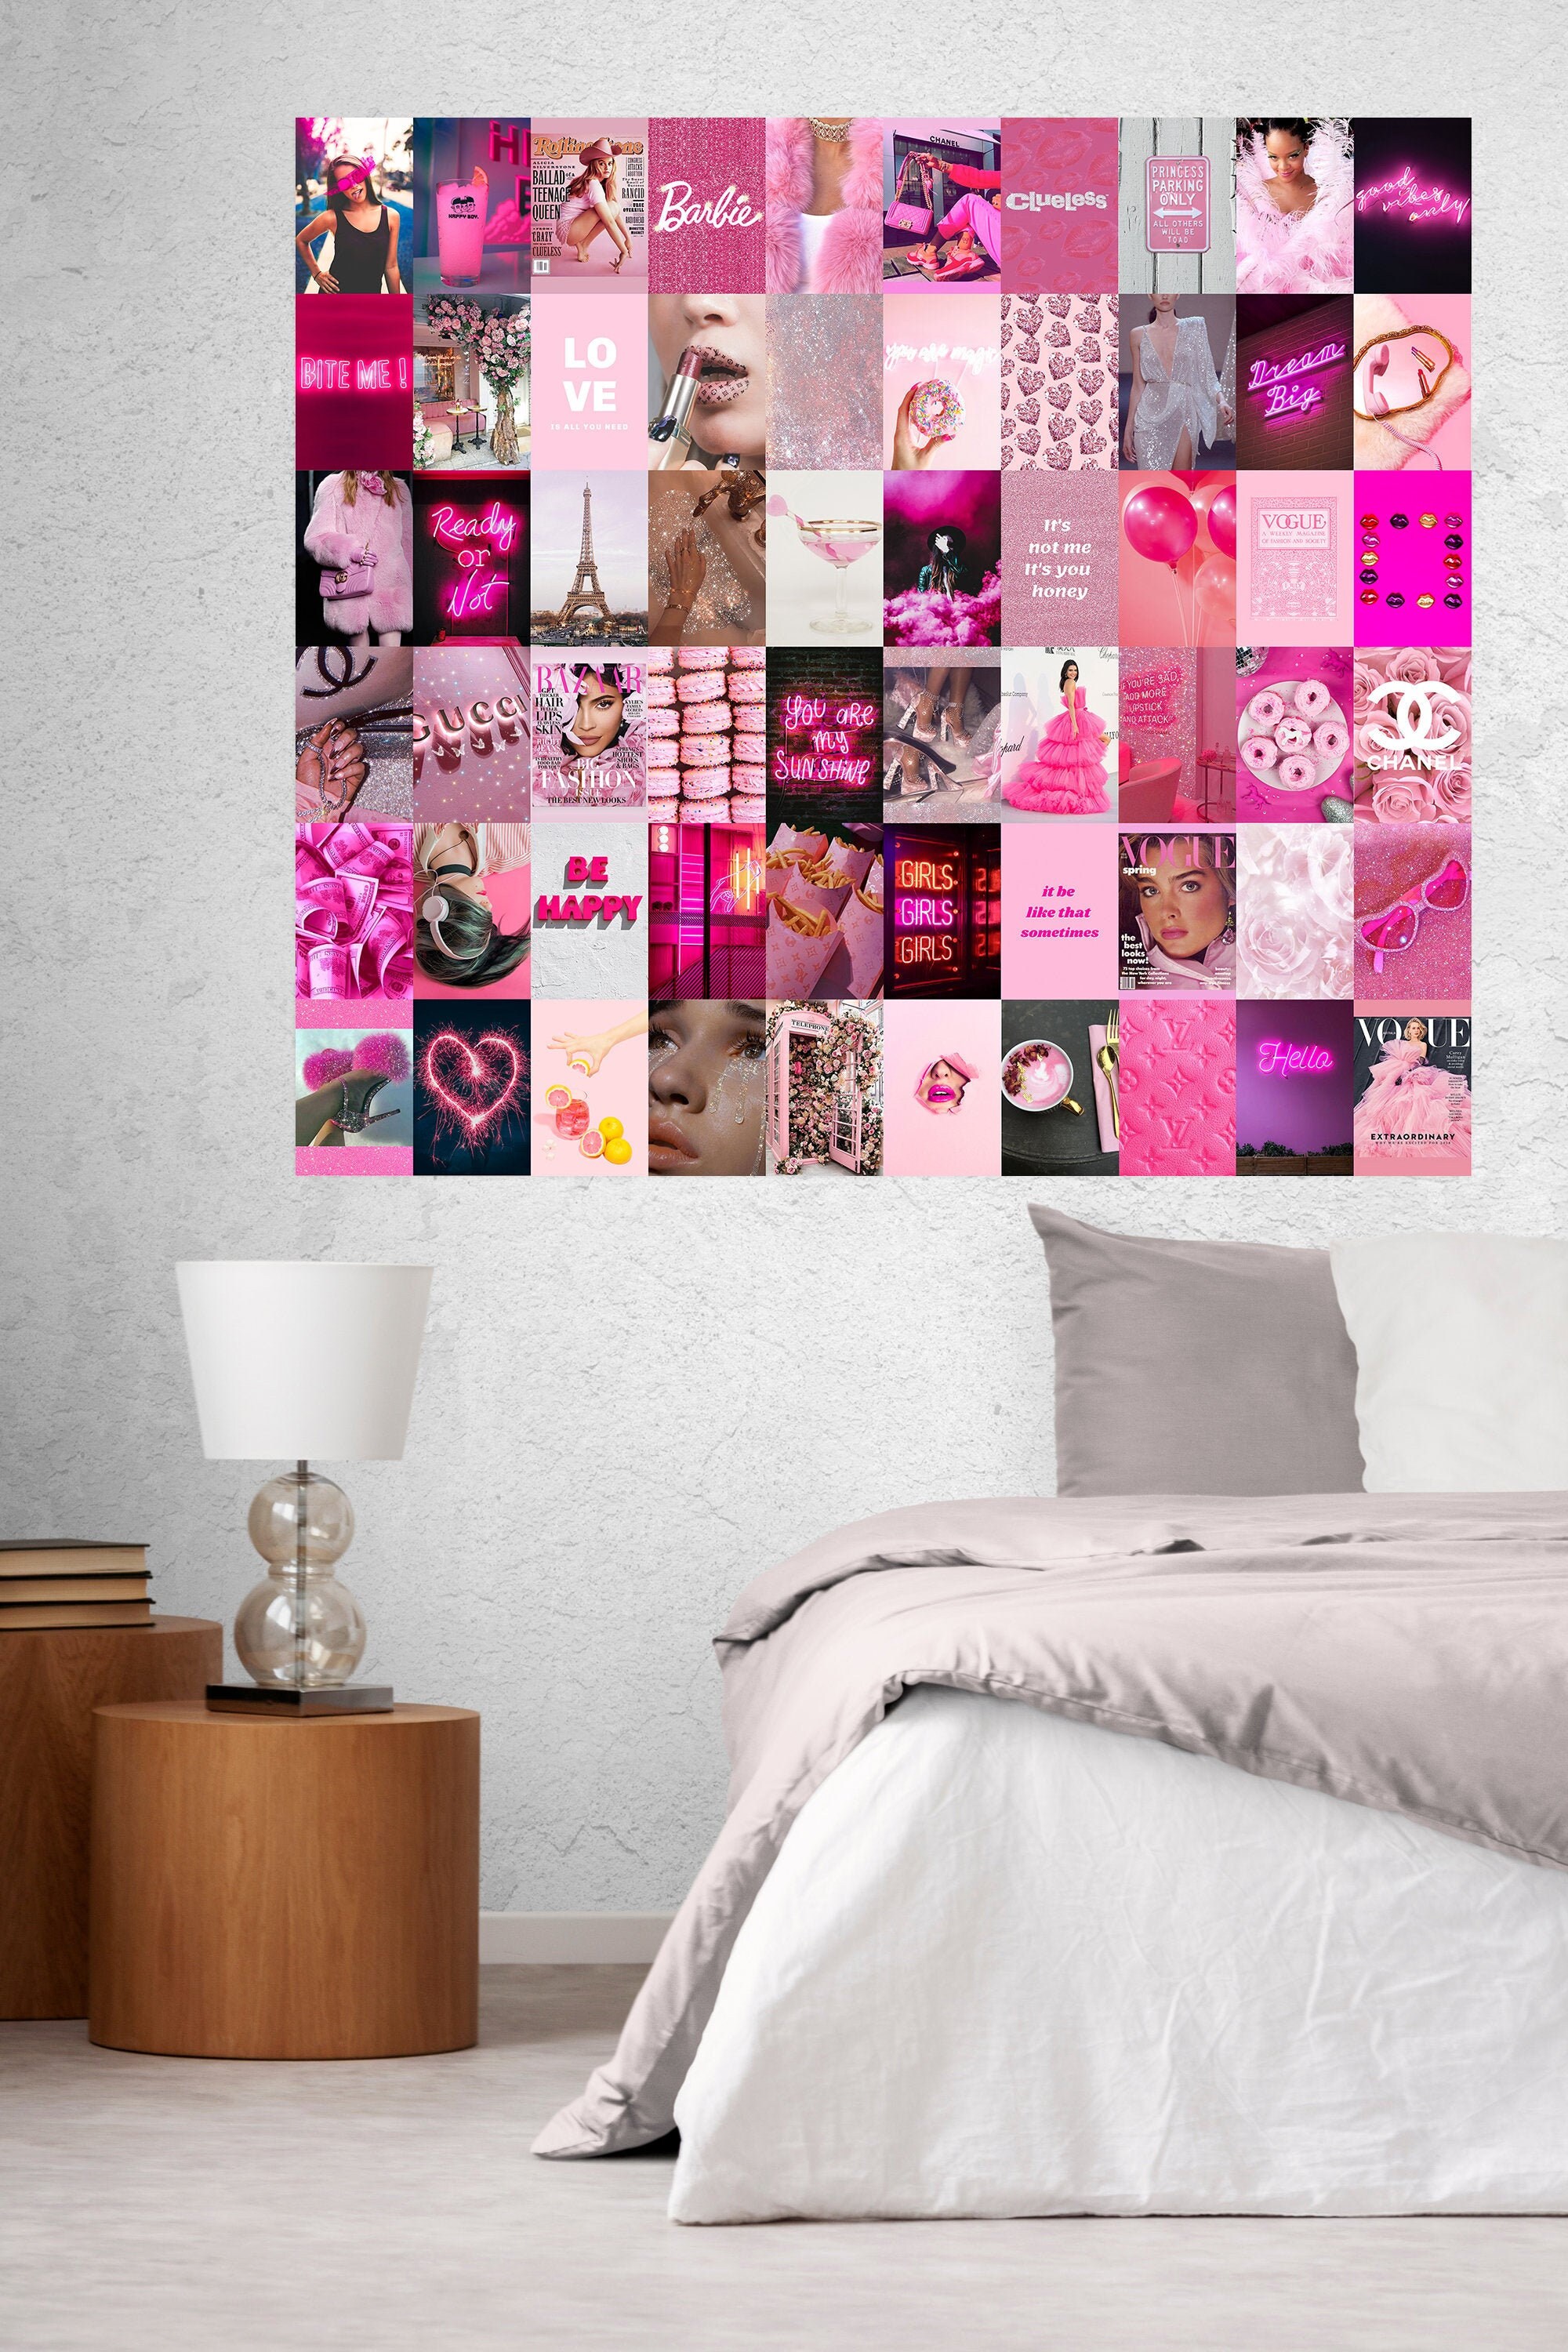 Boujee Pink Aesthetic Wall Collage Kit 60 pcs Pink Photo | Etsy